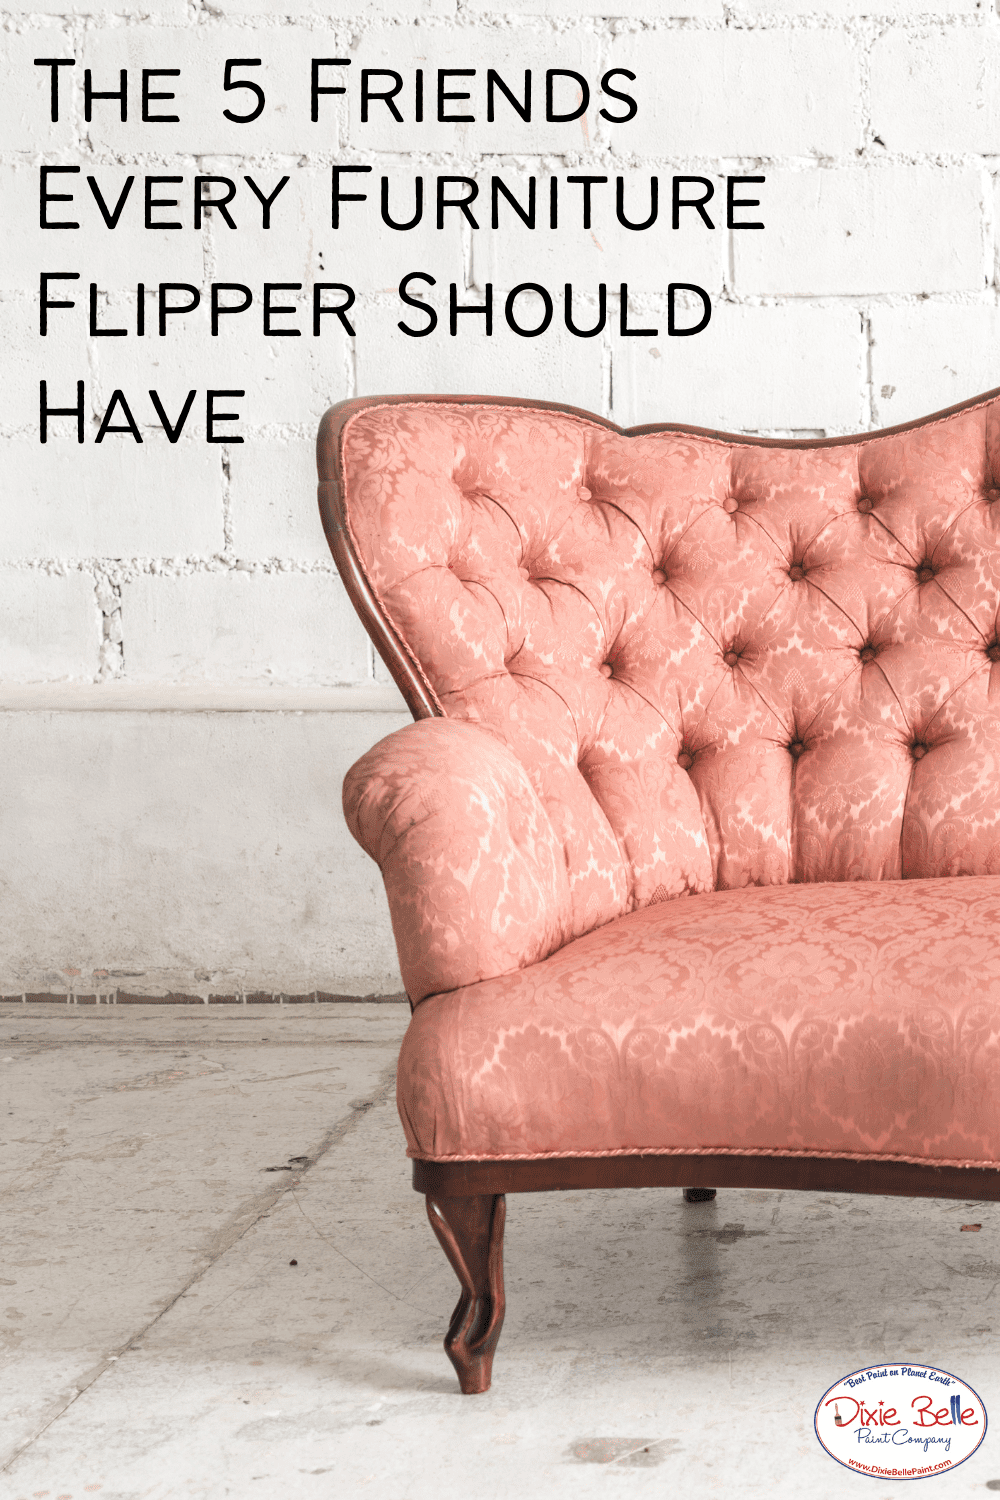 The 5 Friends Every Furniture Flipper Should Have